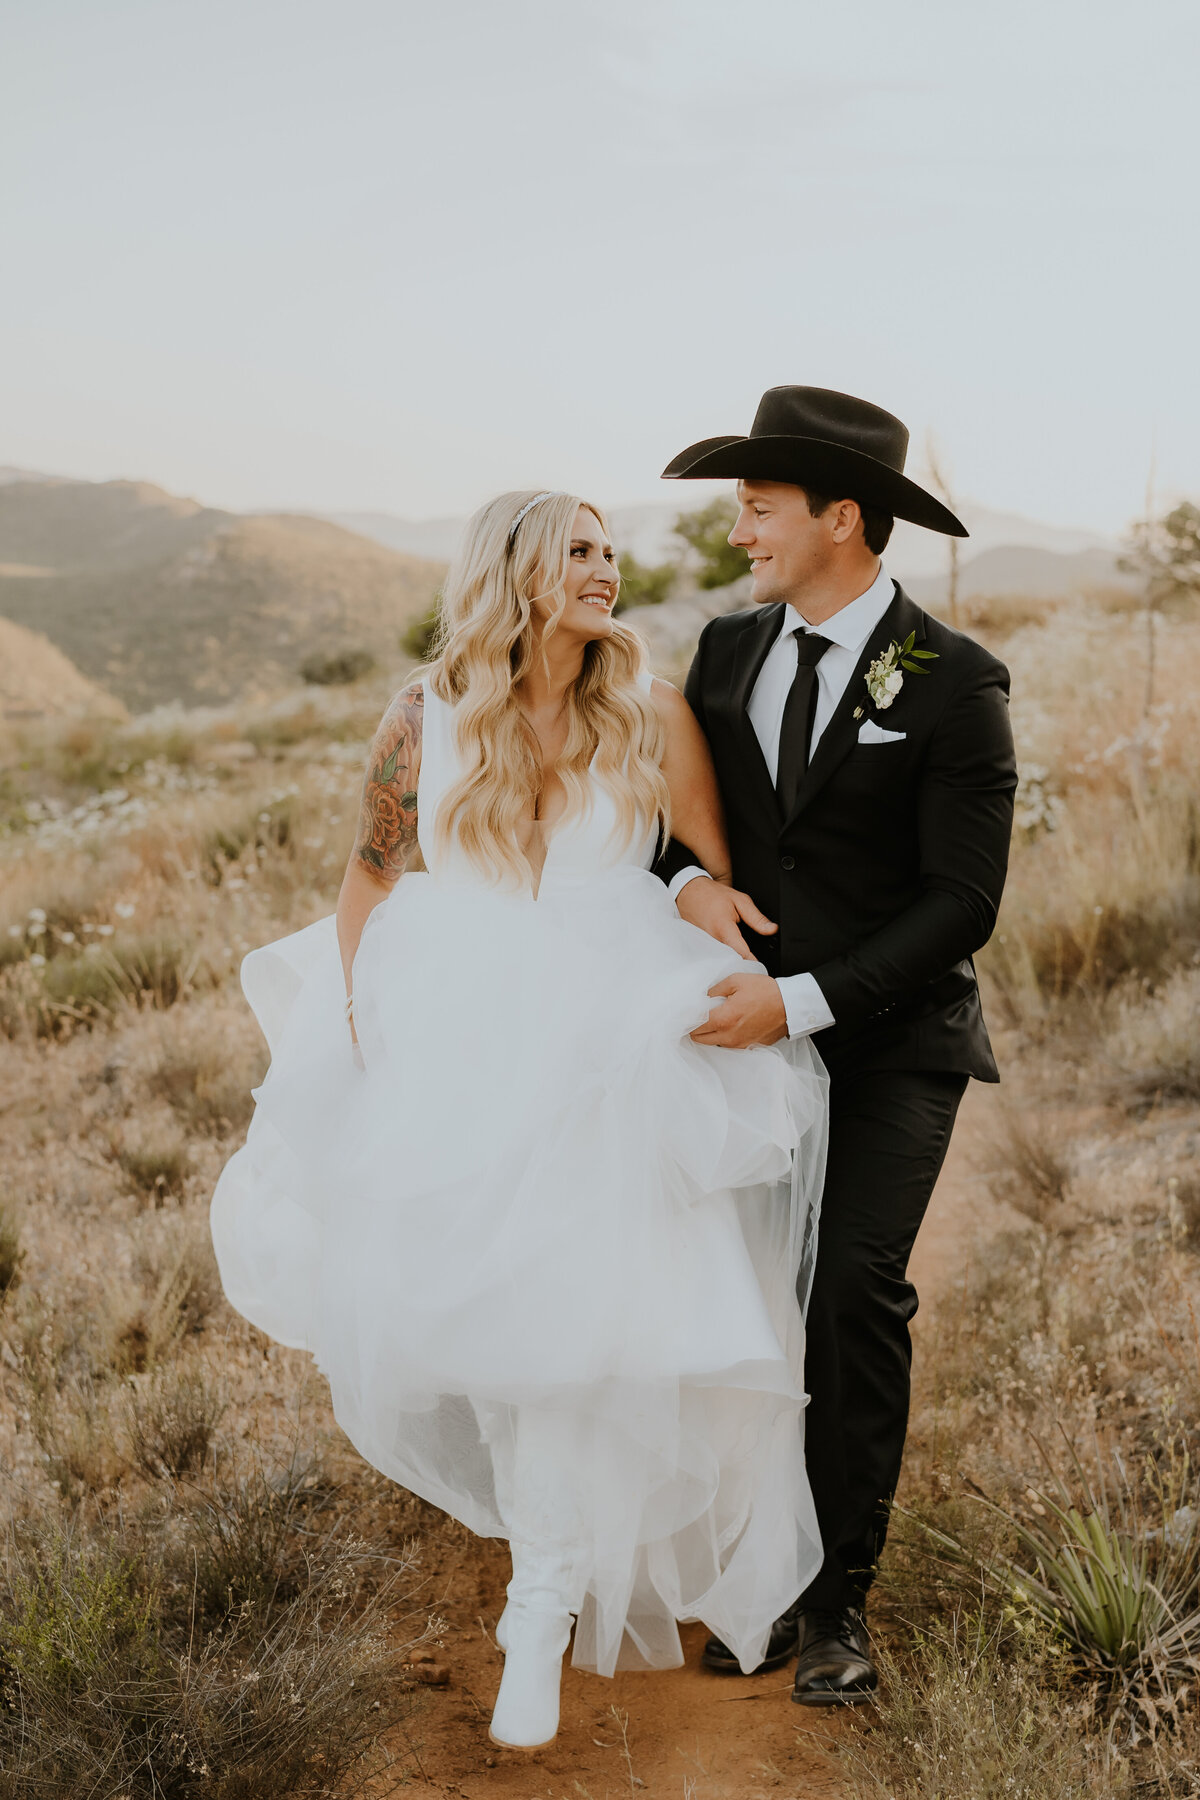 Temecula, California Wedding photographer Yescphotography Bride and Groom with cowboy hat and cowboots